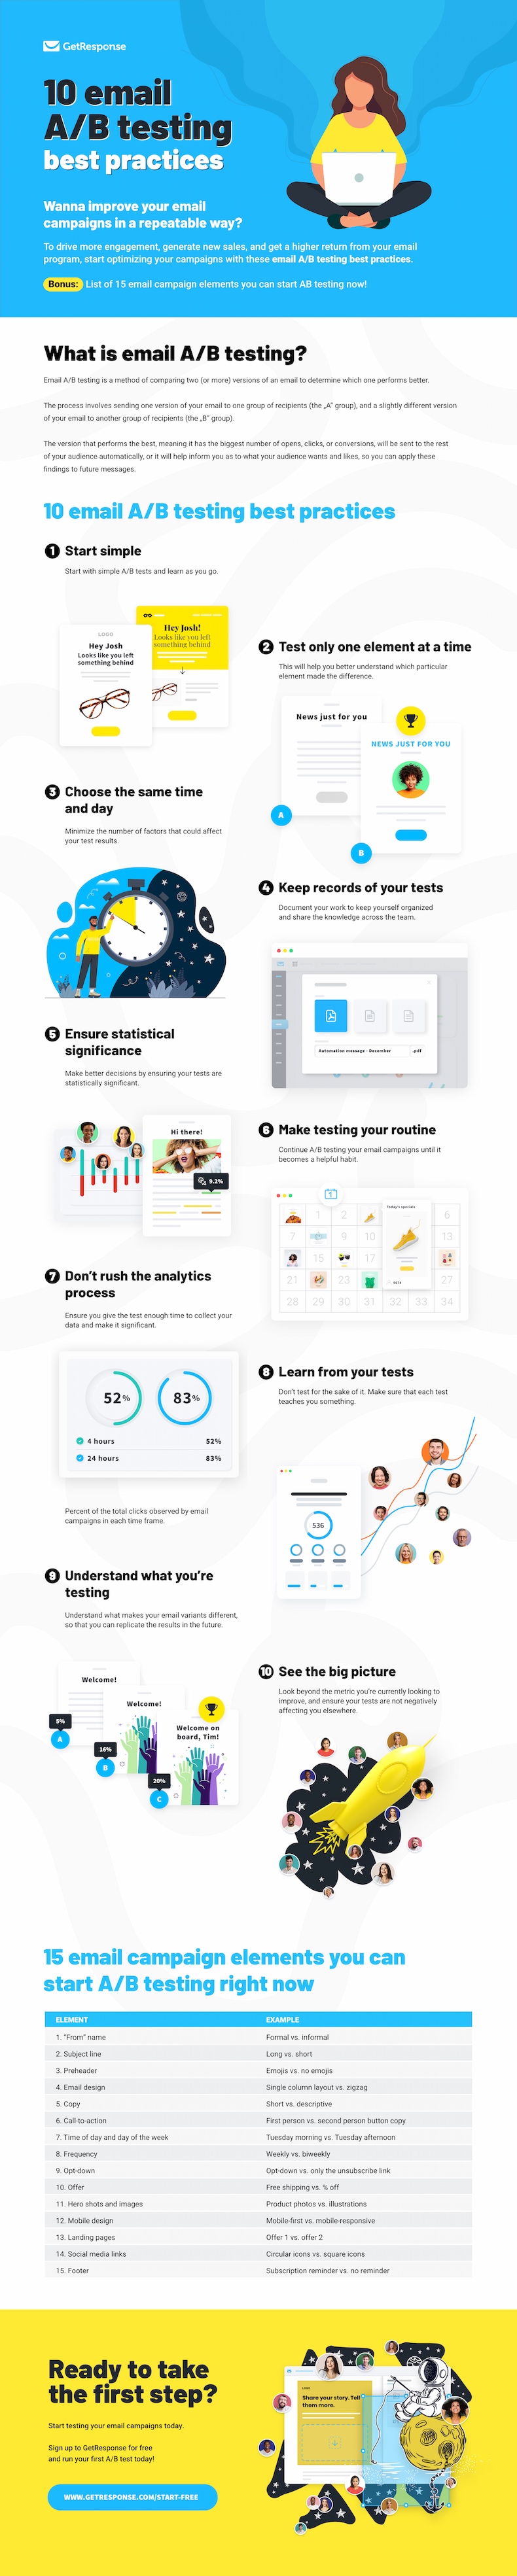 10 email a/b testing best-practices